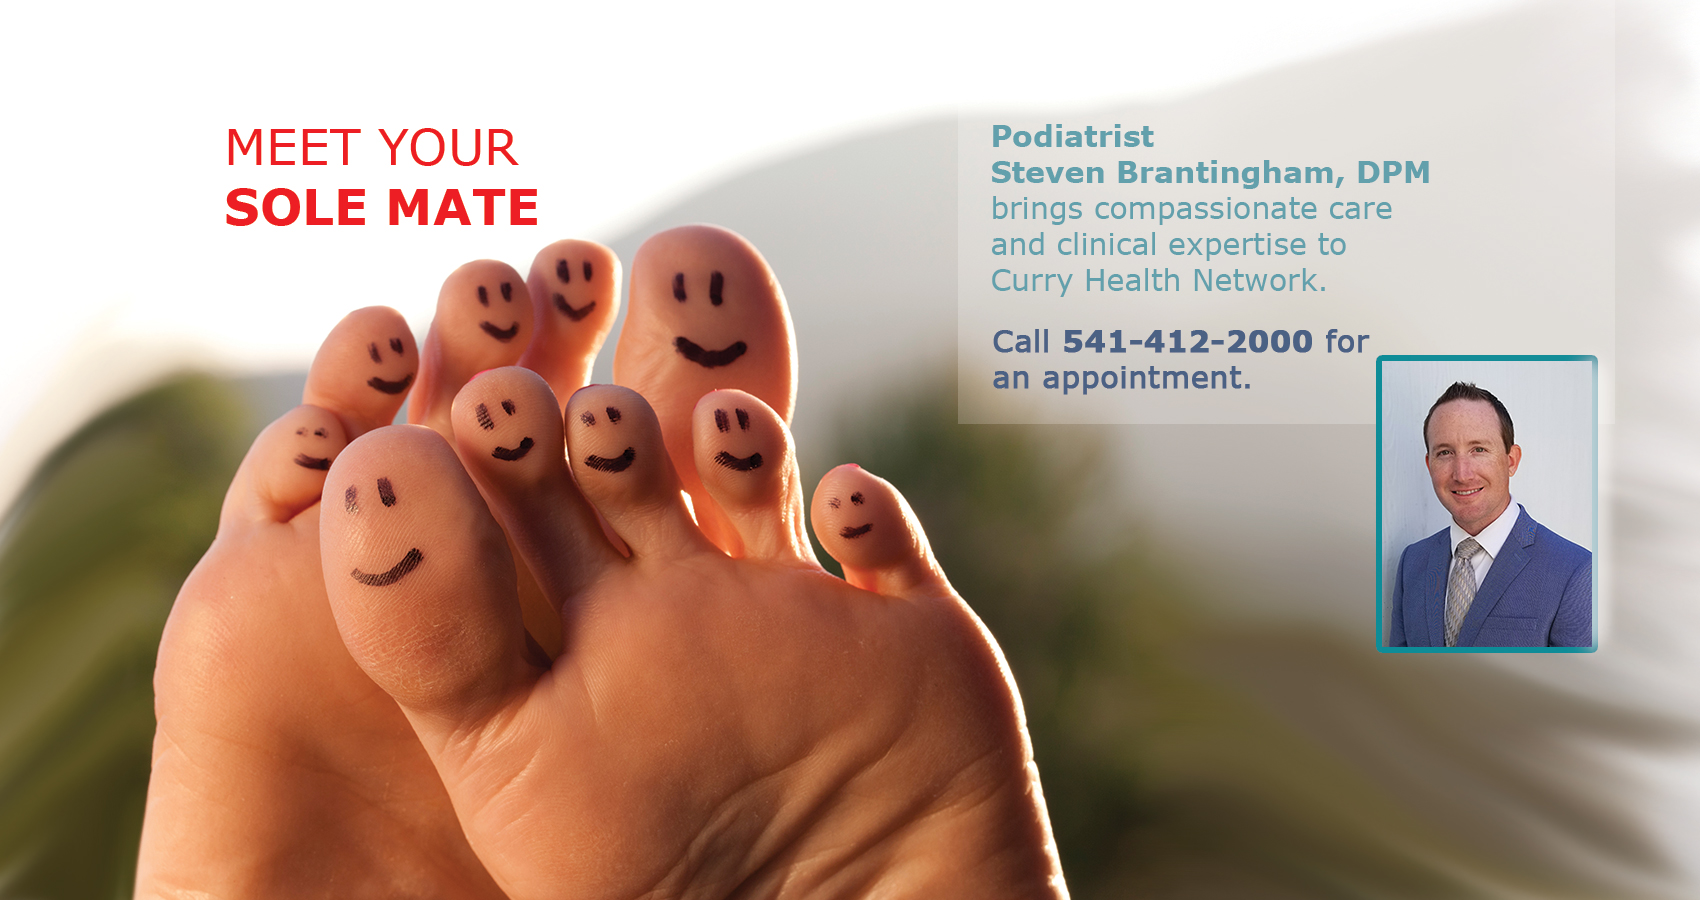 Banner picture of cute toes with faces, and image of physician. Text: Meet your "Sole" Mate. Podiatrist Steven Brantingham, DPM brings compassionate care and clinical expertise to Curry Health Network.